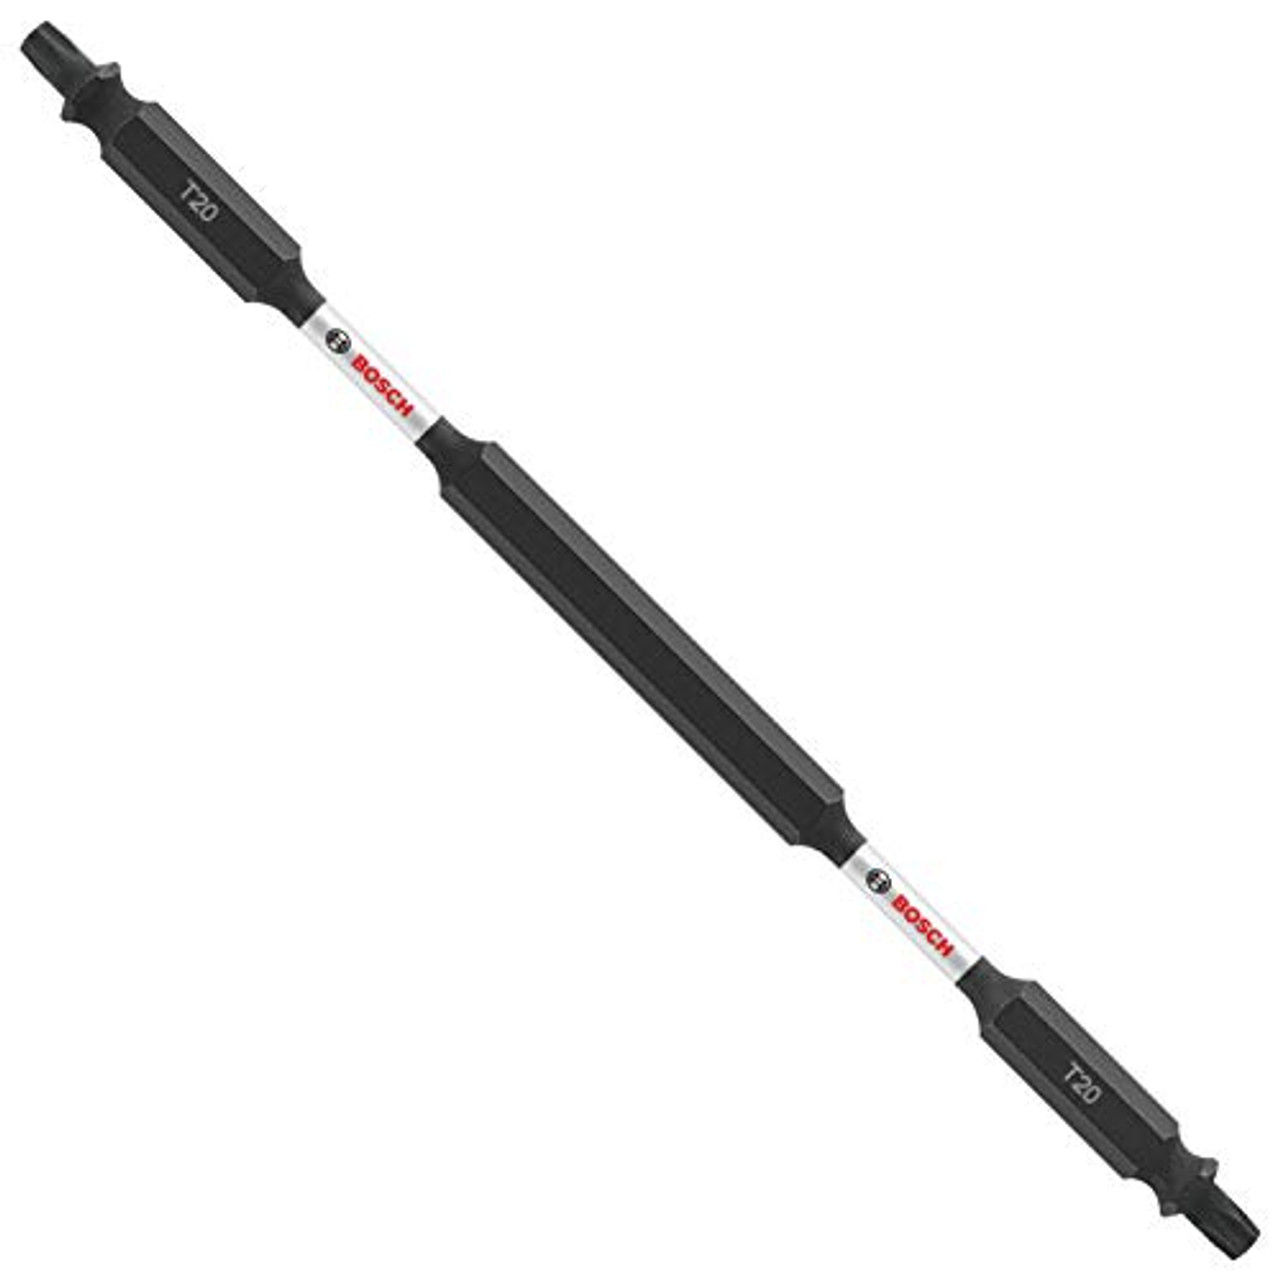 BOSCH ITDET20601 6 In. Torx #20 Double-Ended Impact Tough Screwdriving Bit